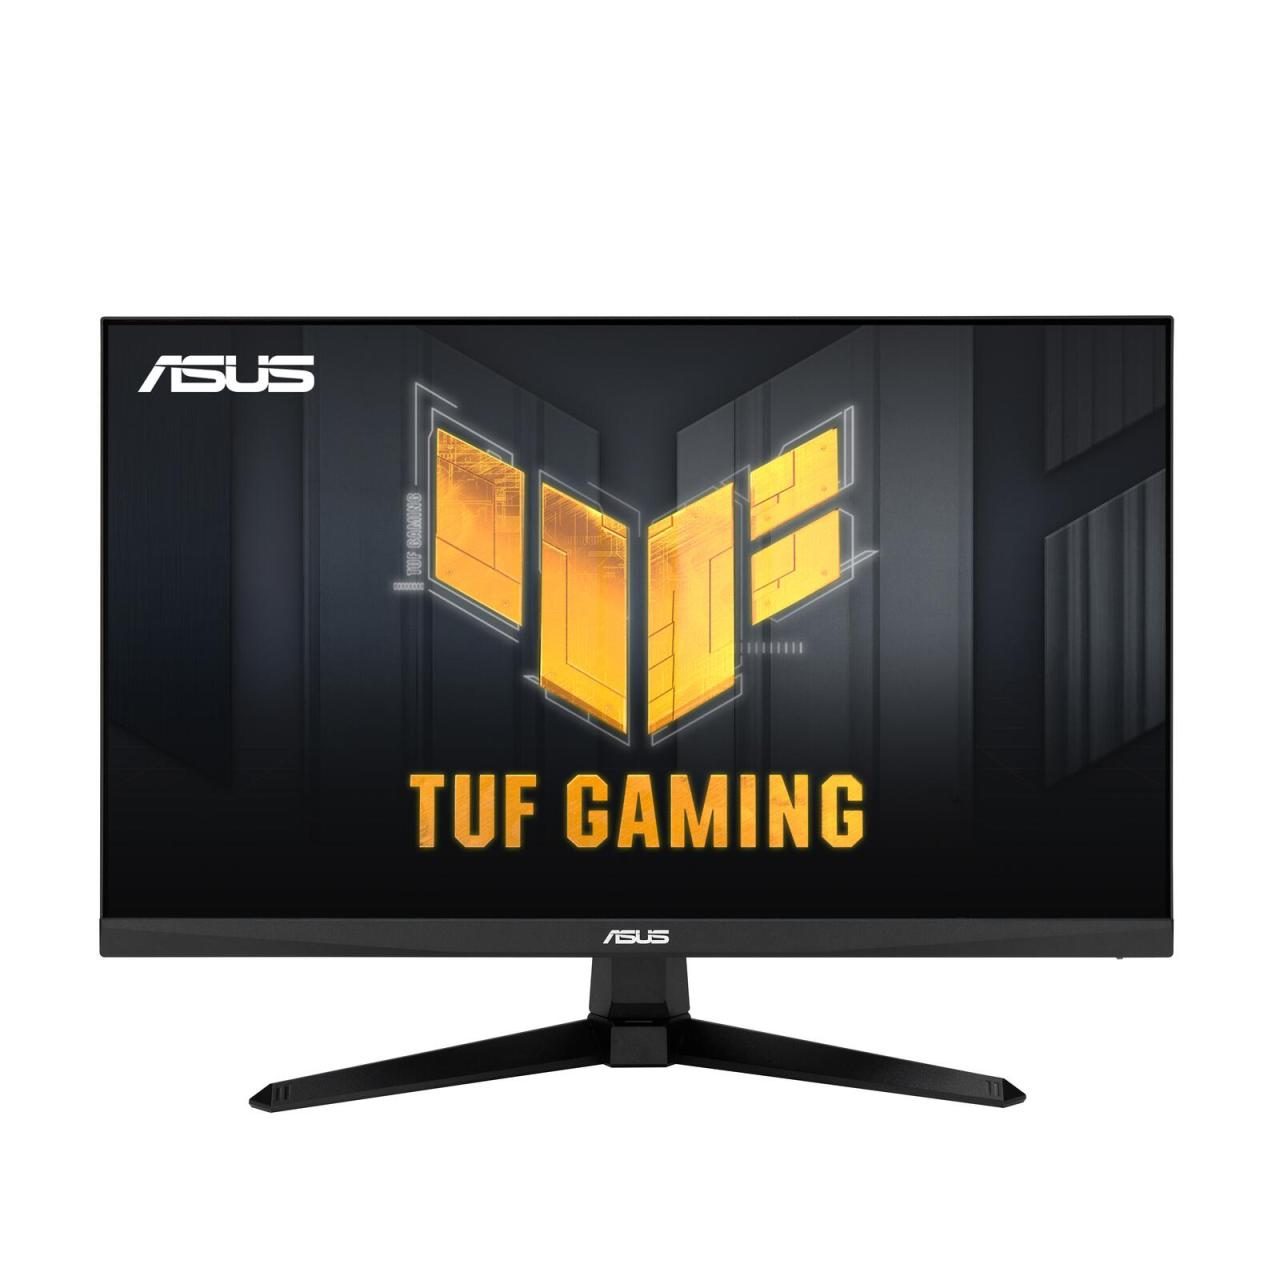 ASUS TUF Gaming VG246H1A Monitor 60,5 cm (23,8 Zoll) von ASUS